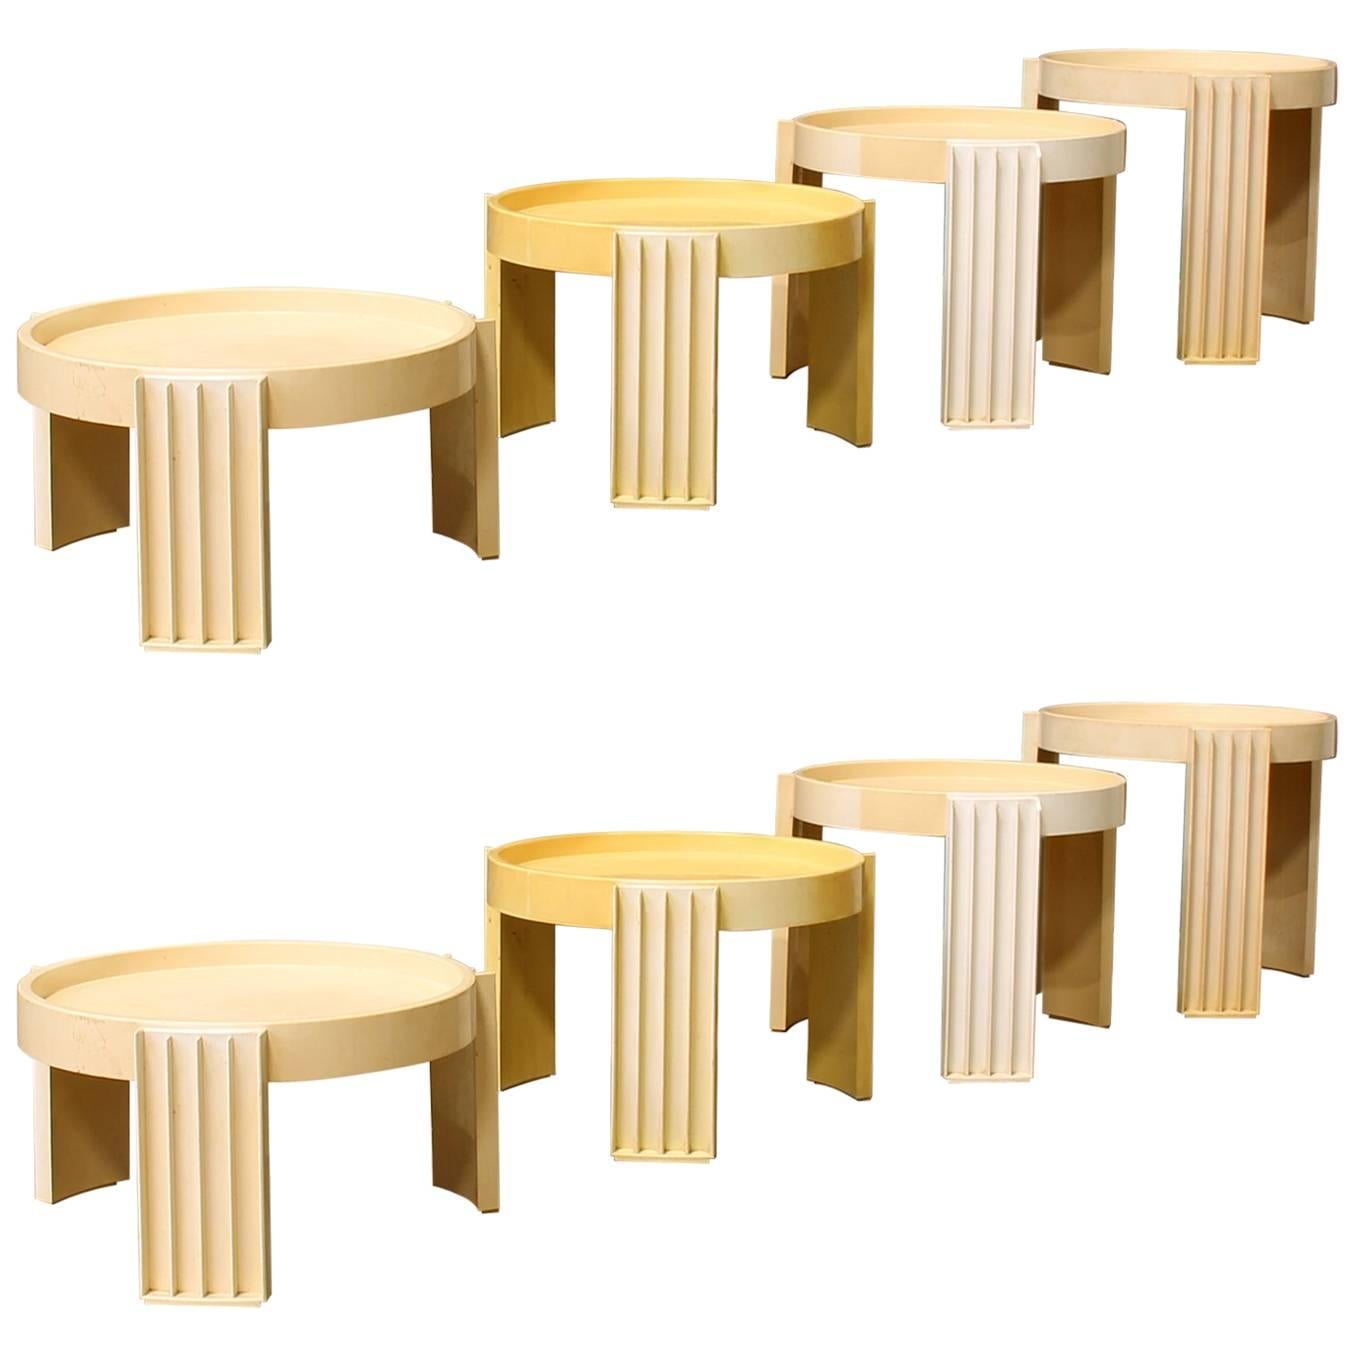 1967, Gianfranco Frattini for Cassina, 8 Pieces of Marema Stacking Tables For Sale